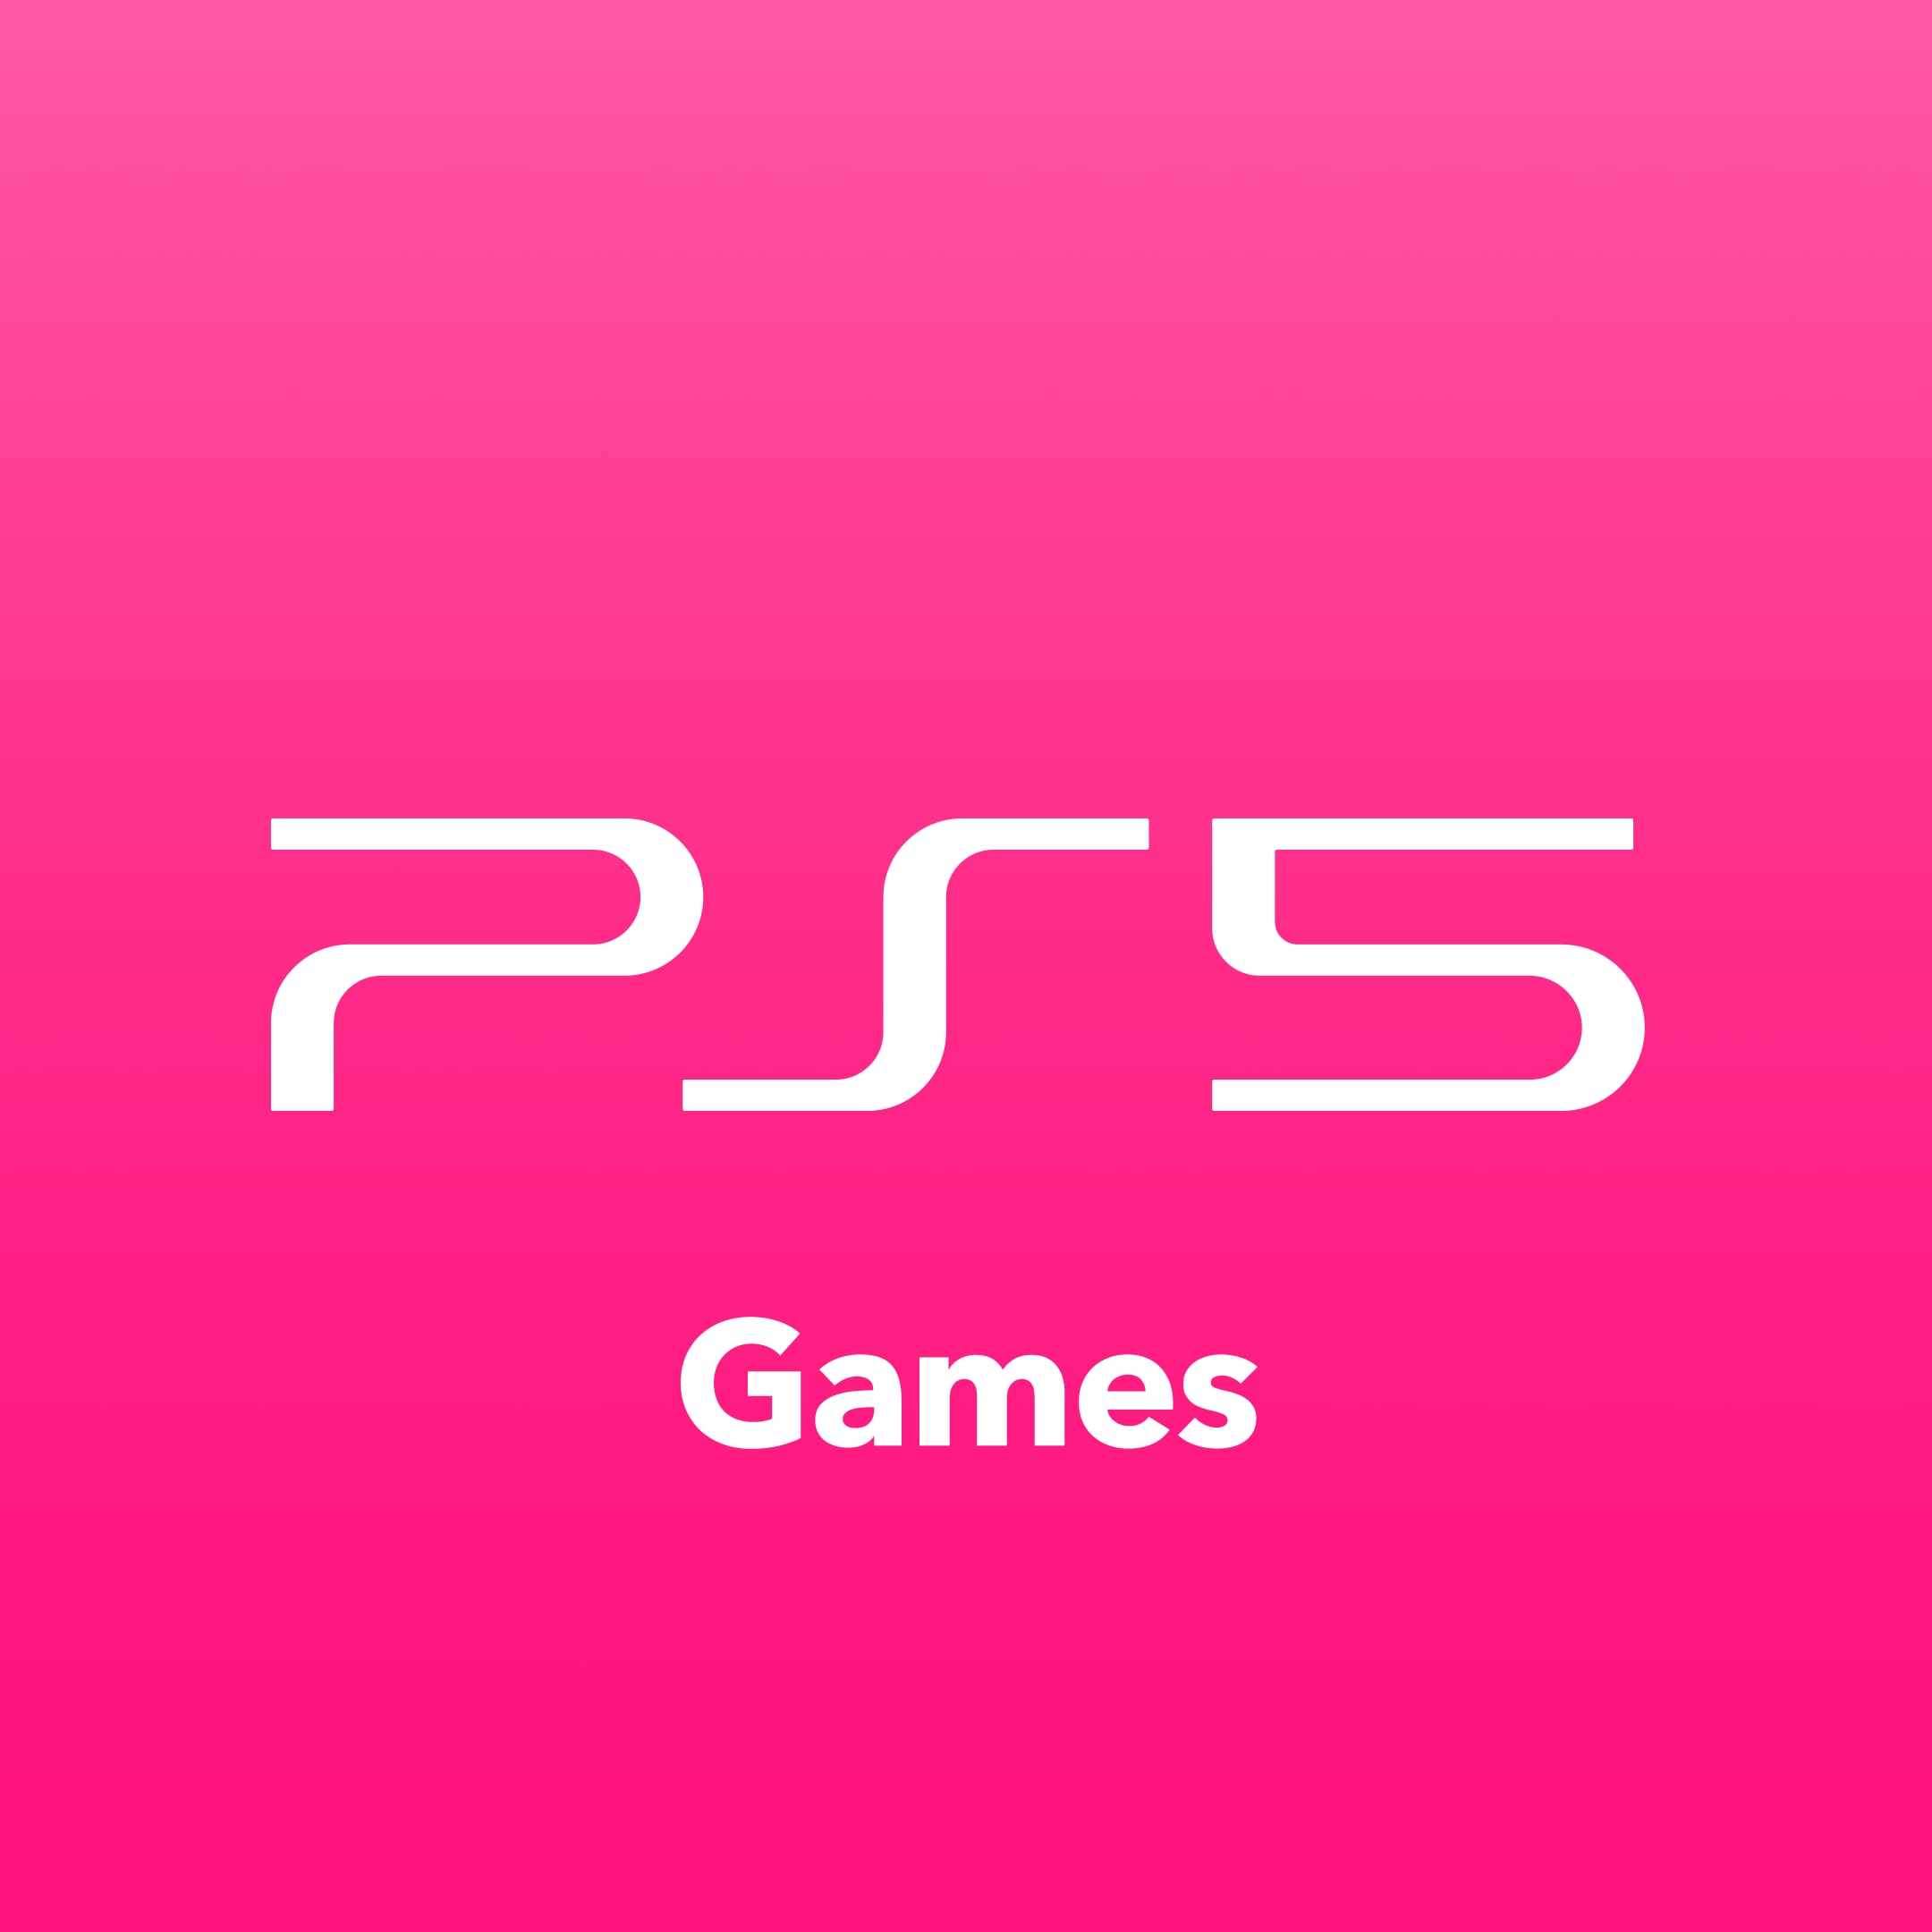 Games and Bundles Discounts (PS4) in PlayStation Store — PS Deals Iceland